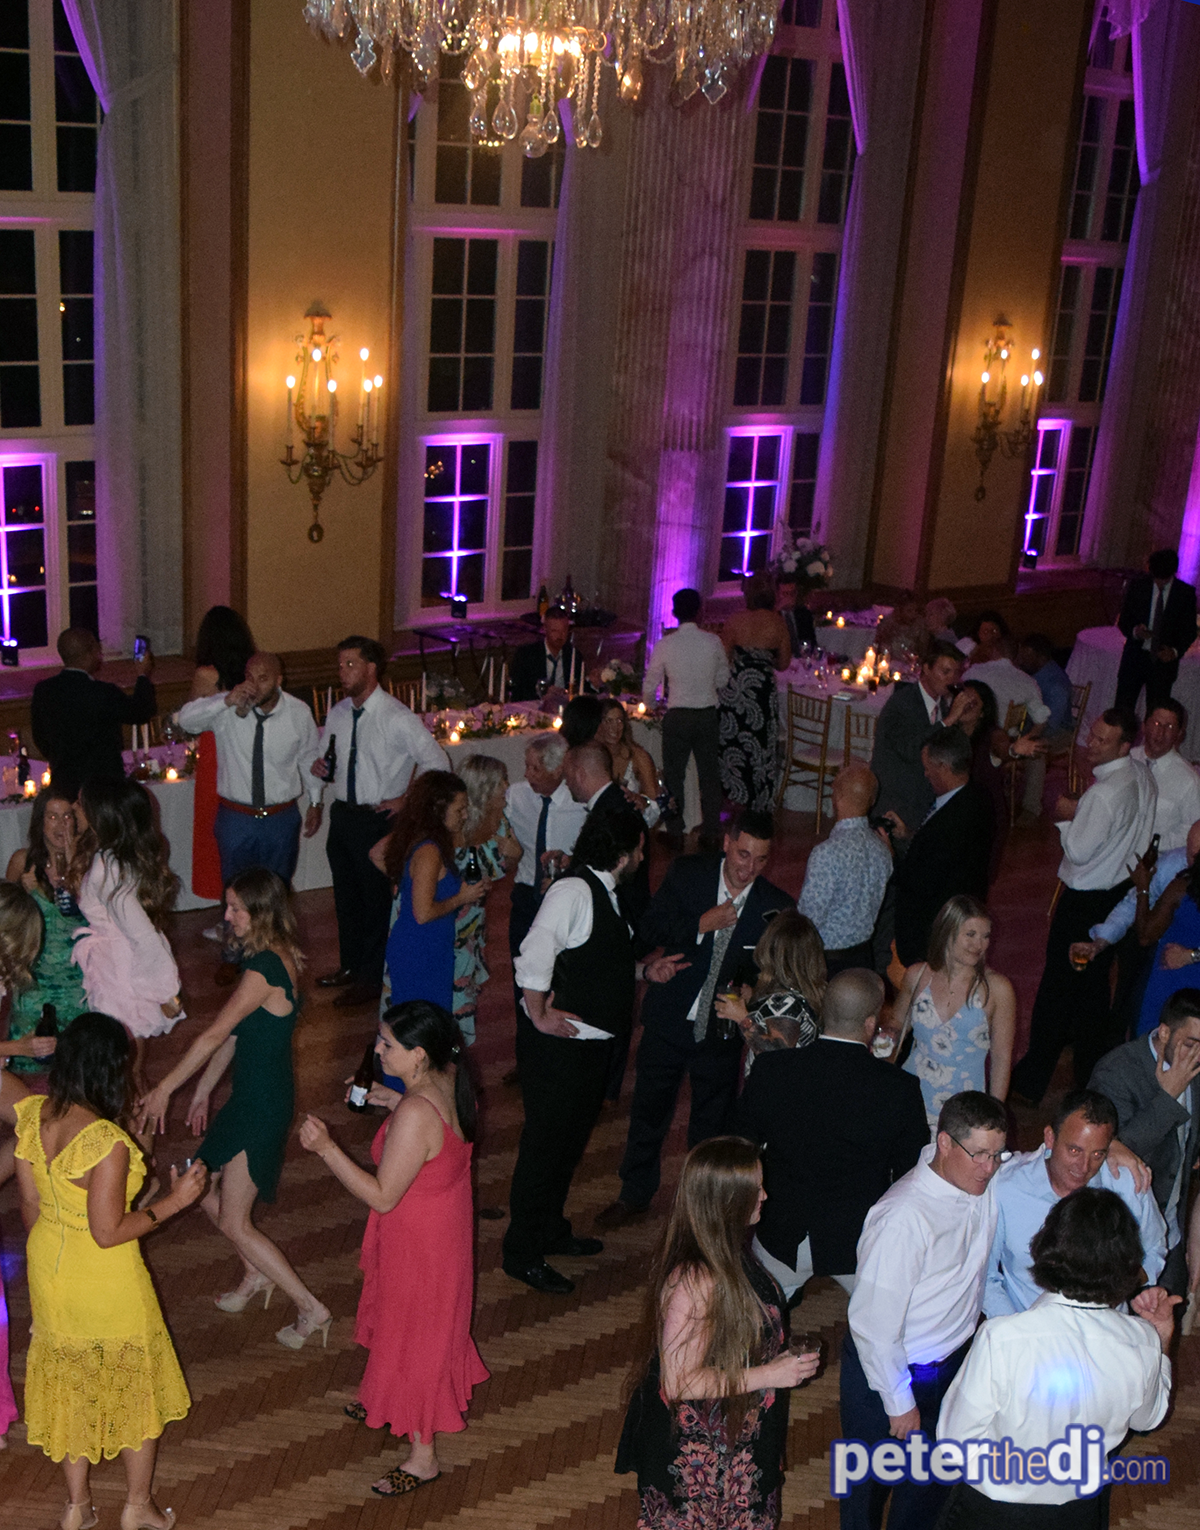 Liz and Brian's wedding reception in the Grand Ballroom at Syracuse Marriott Downtown. Photo by DJ Peter Naughton peterthedj.com July 2019.